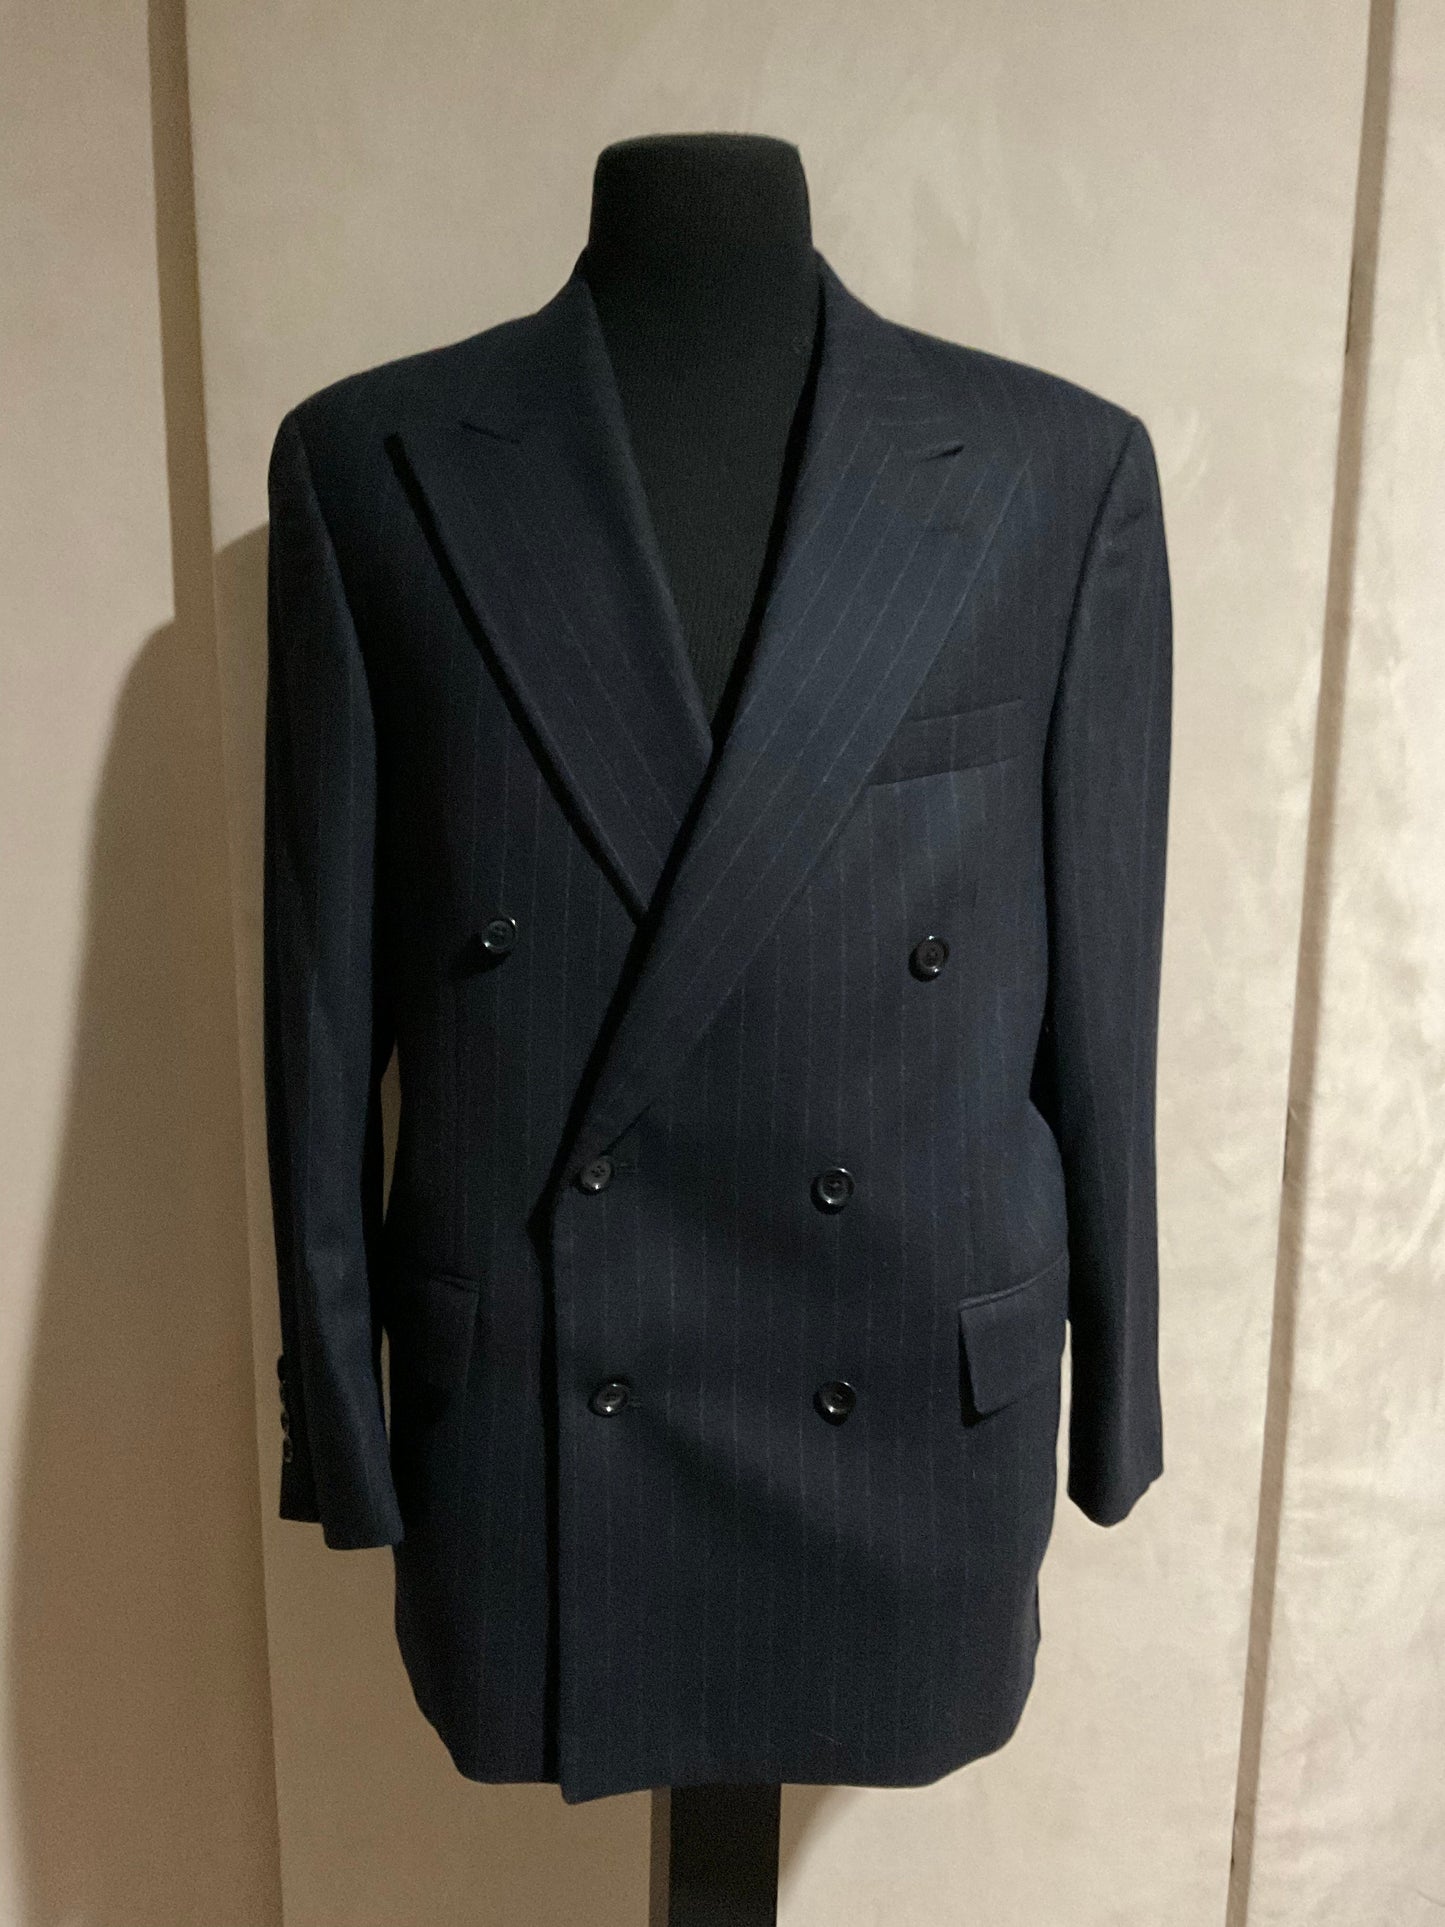 R P SUIT / DOUBLE BREASTED / CASHMERE & WOOL / NAVY CHALK STRIPE / 40 REG / MADE IN CANADA